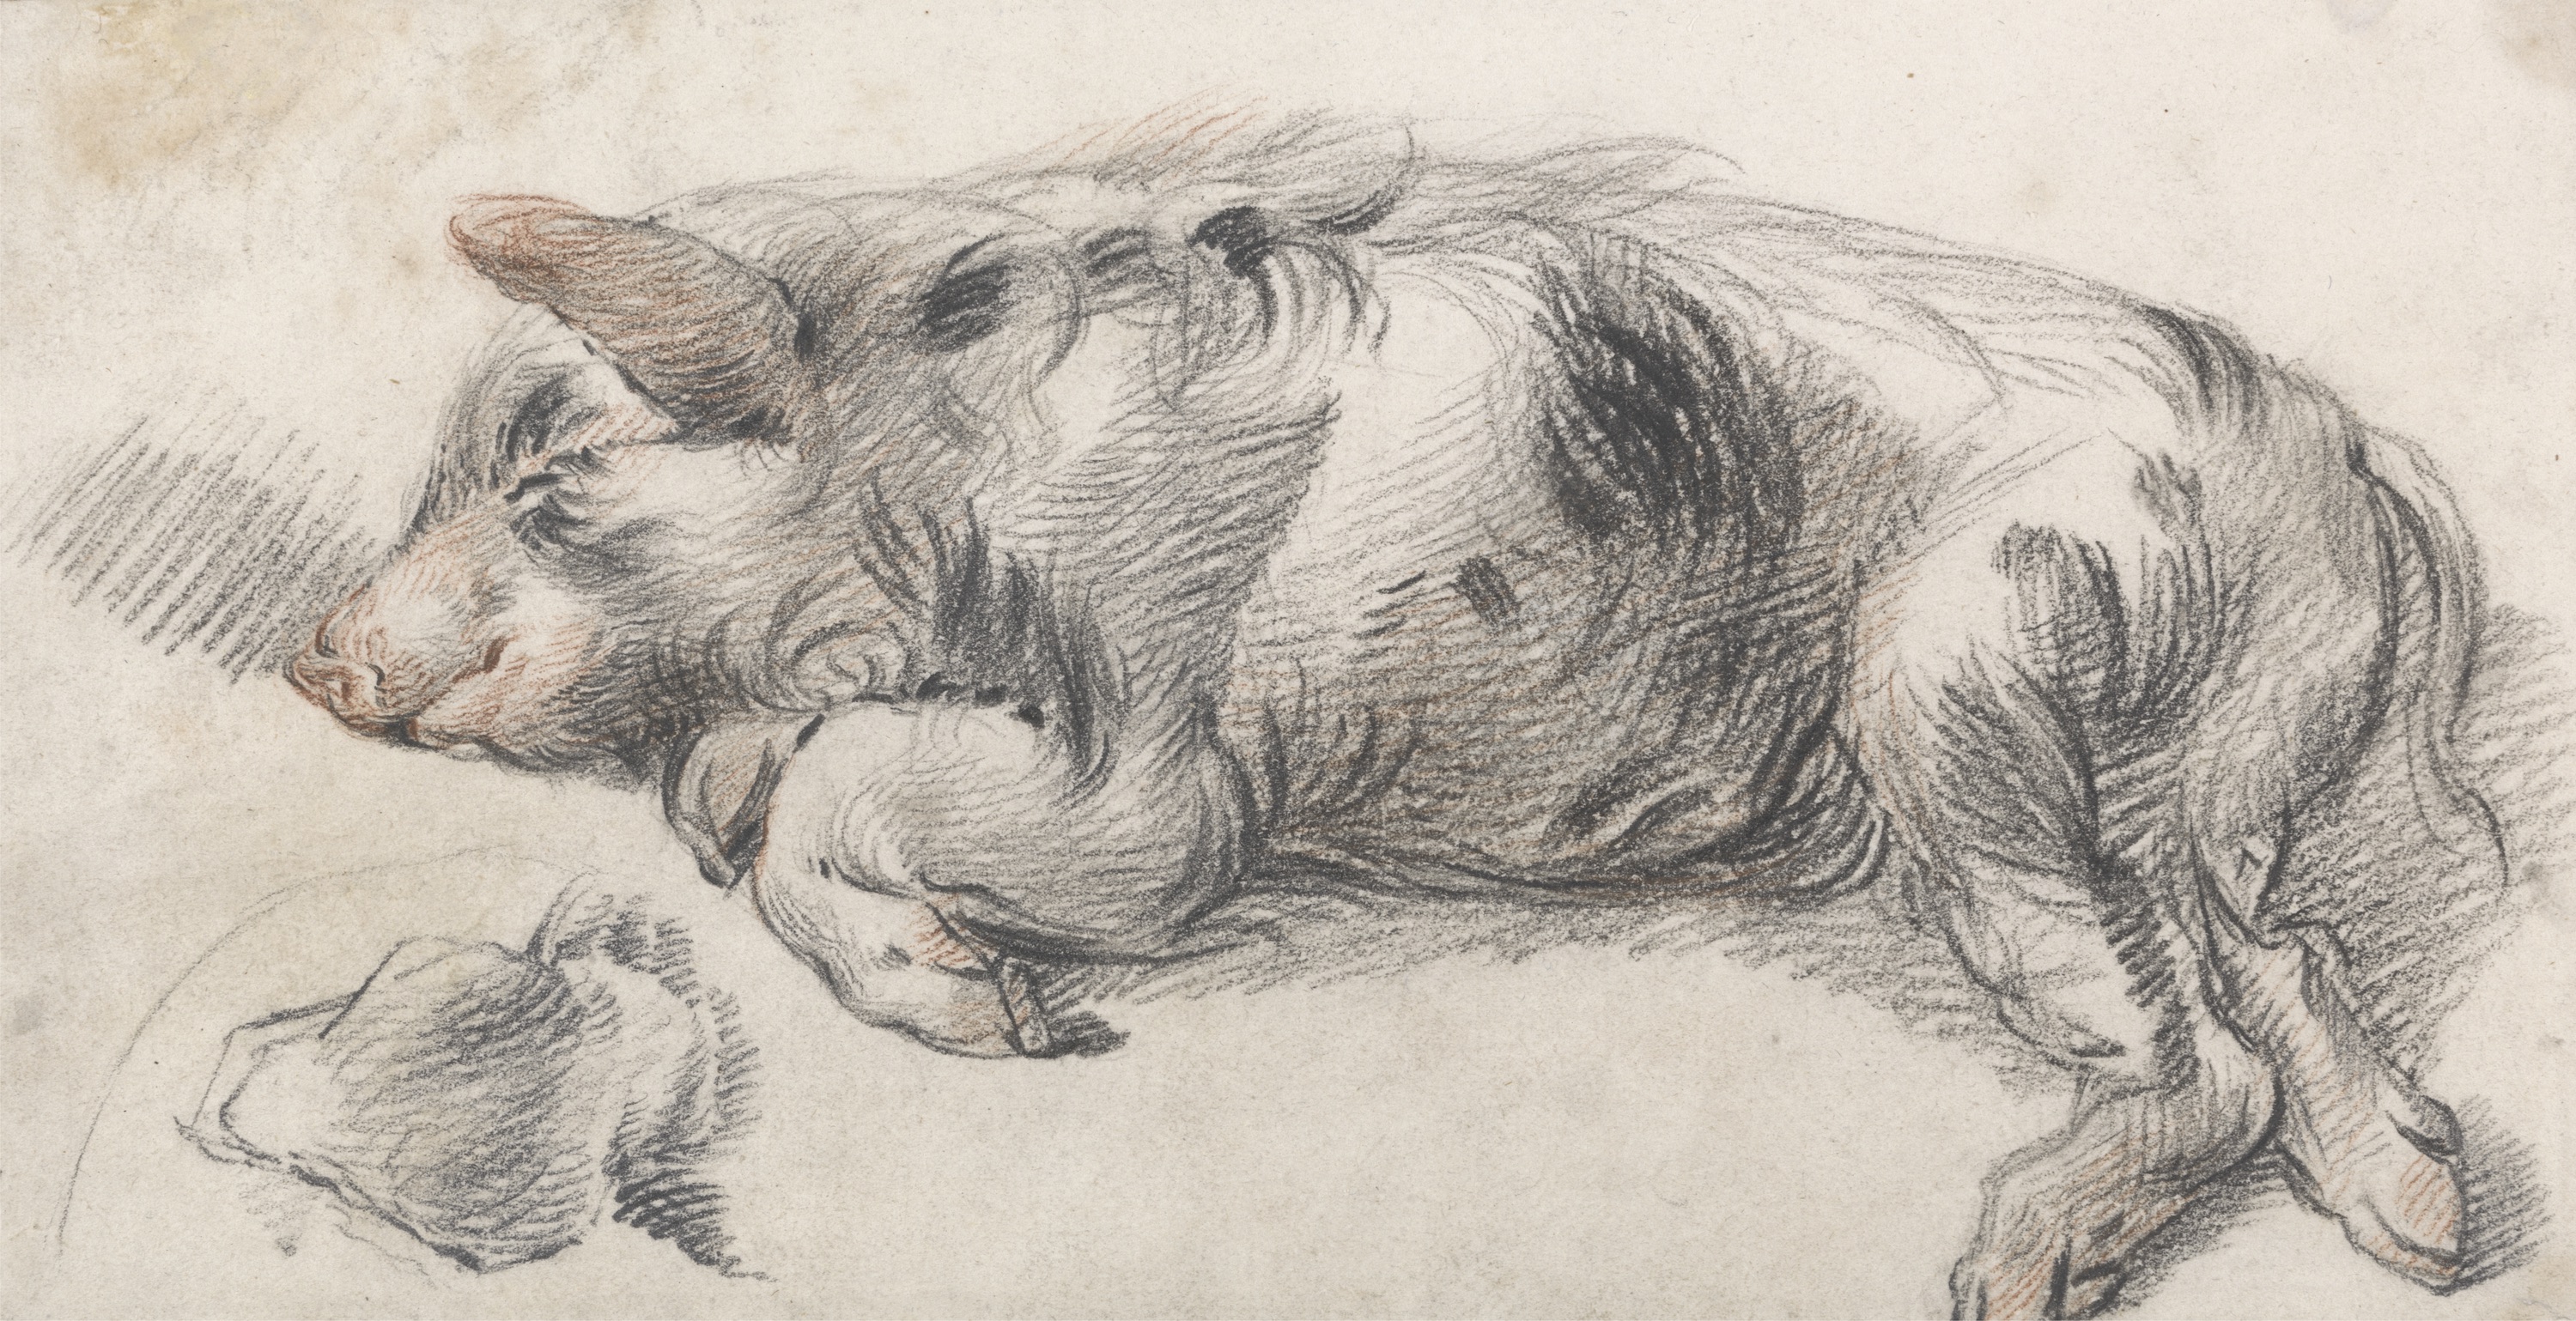 Sleeping Pig by James Ward - 1st half of 19th century - 26 x 14 cm Yale Center for British Art